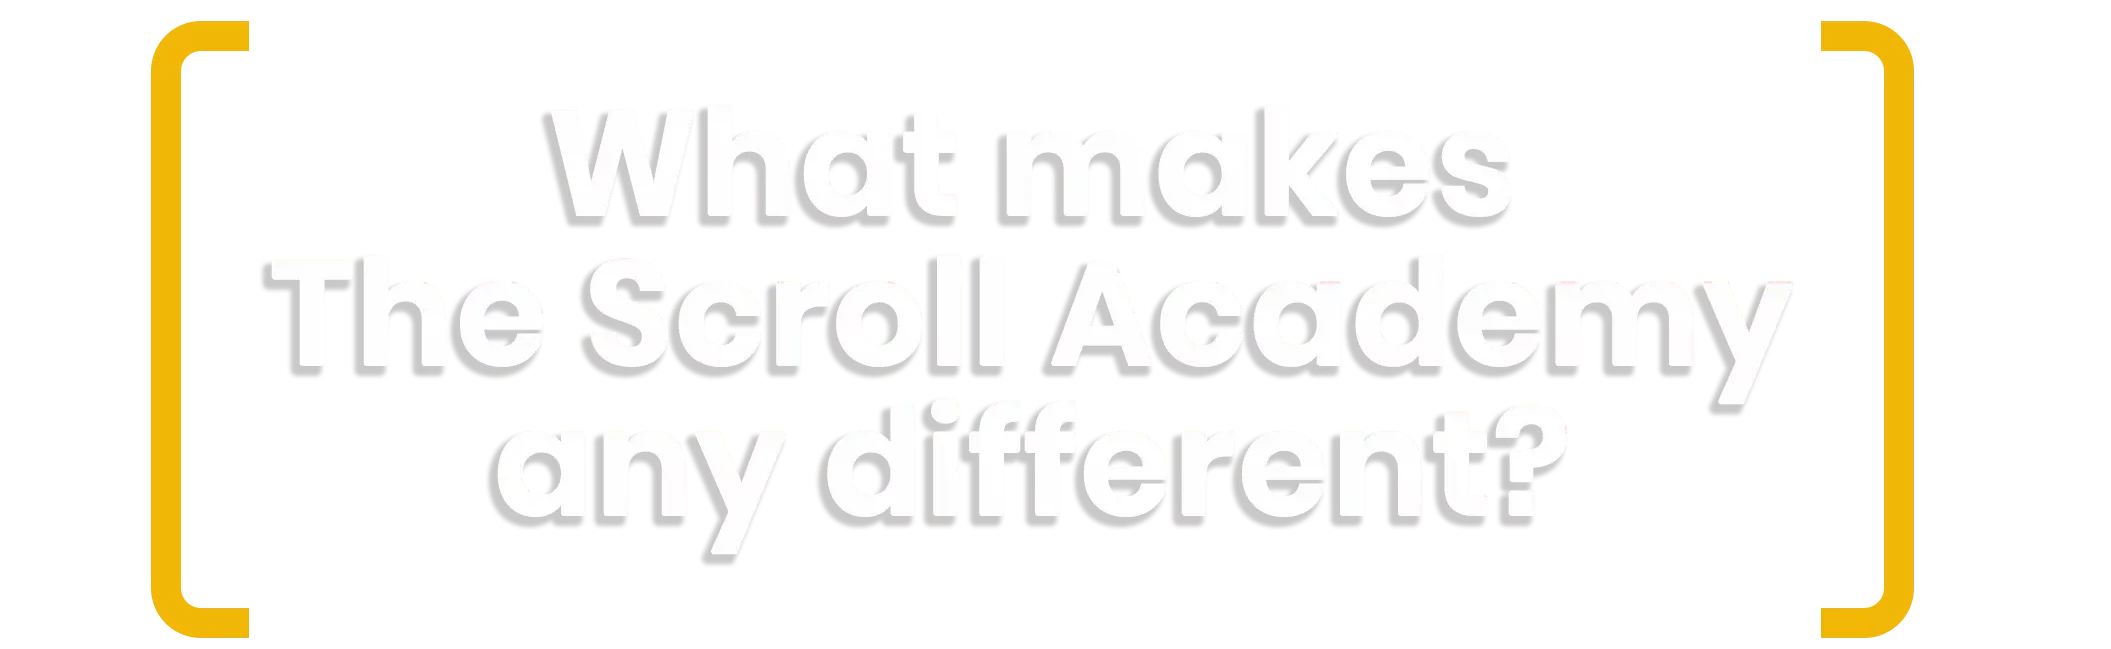 banner with text asking what makes The Scroll Academy different